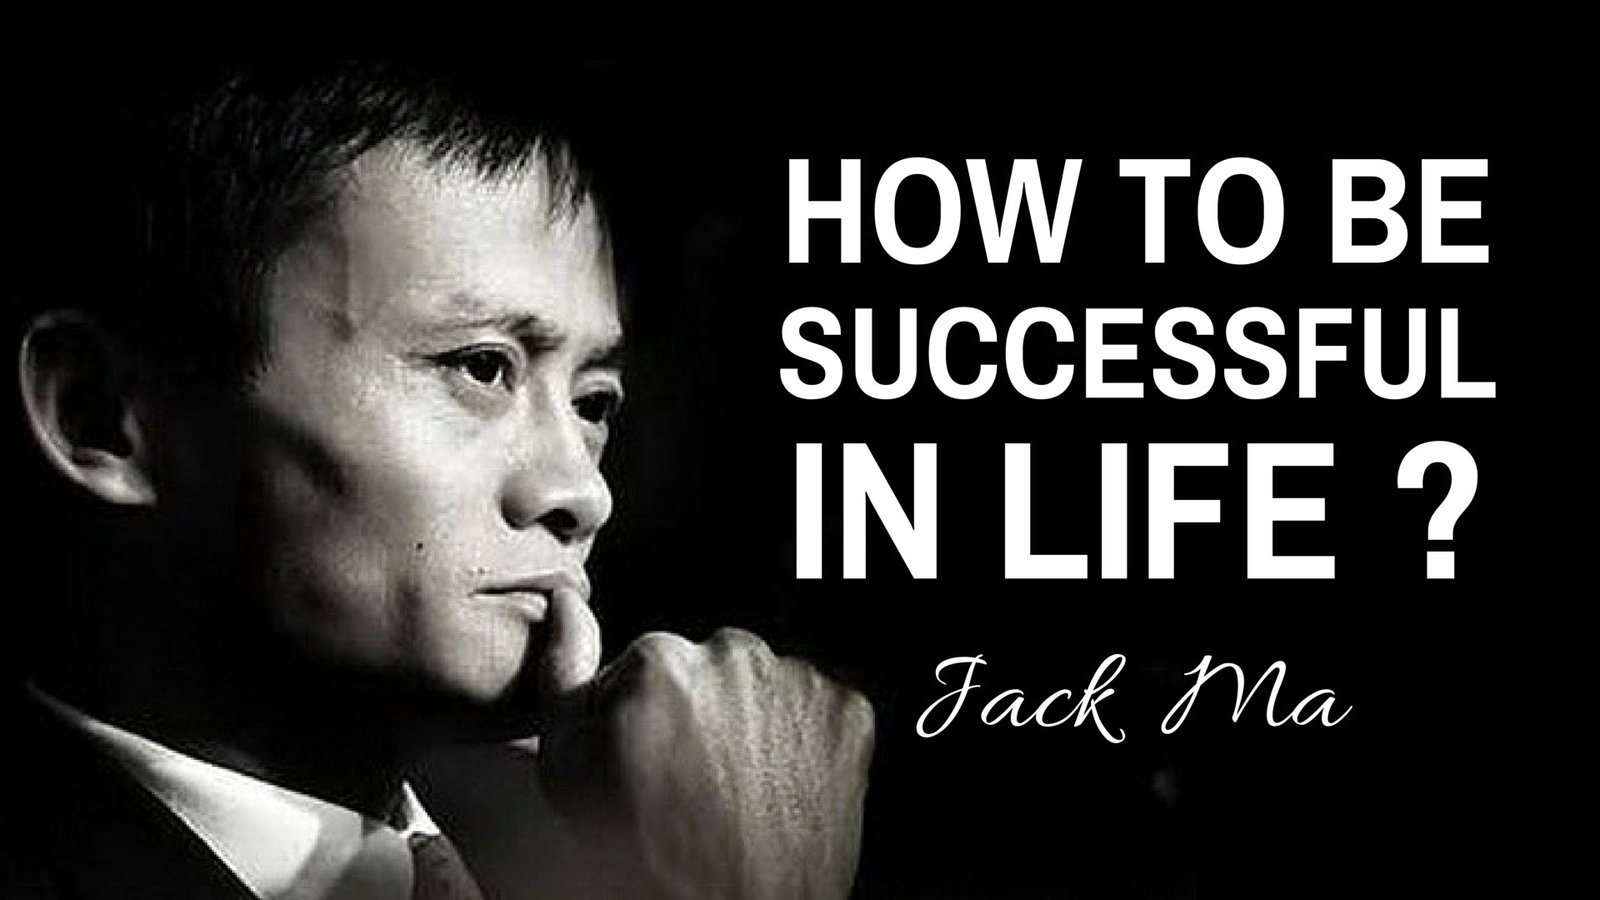 Jack Ma: What You Should Do at Different Life Stages 